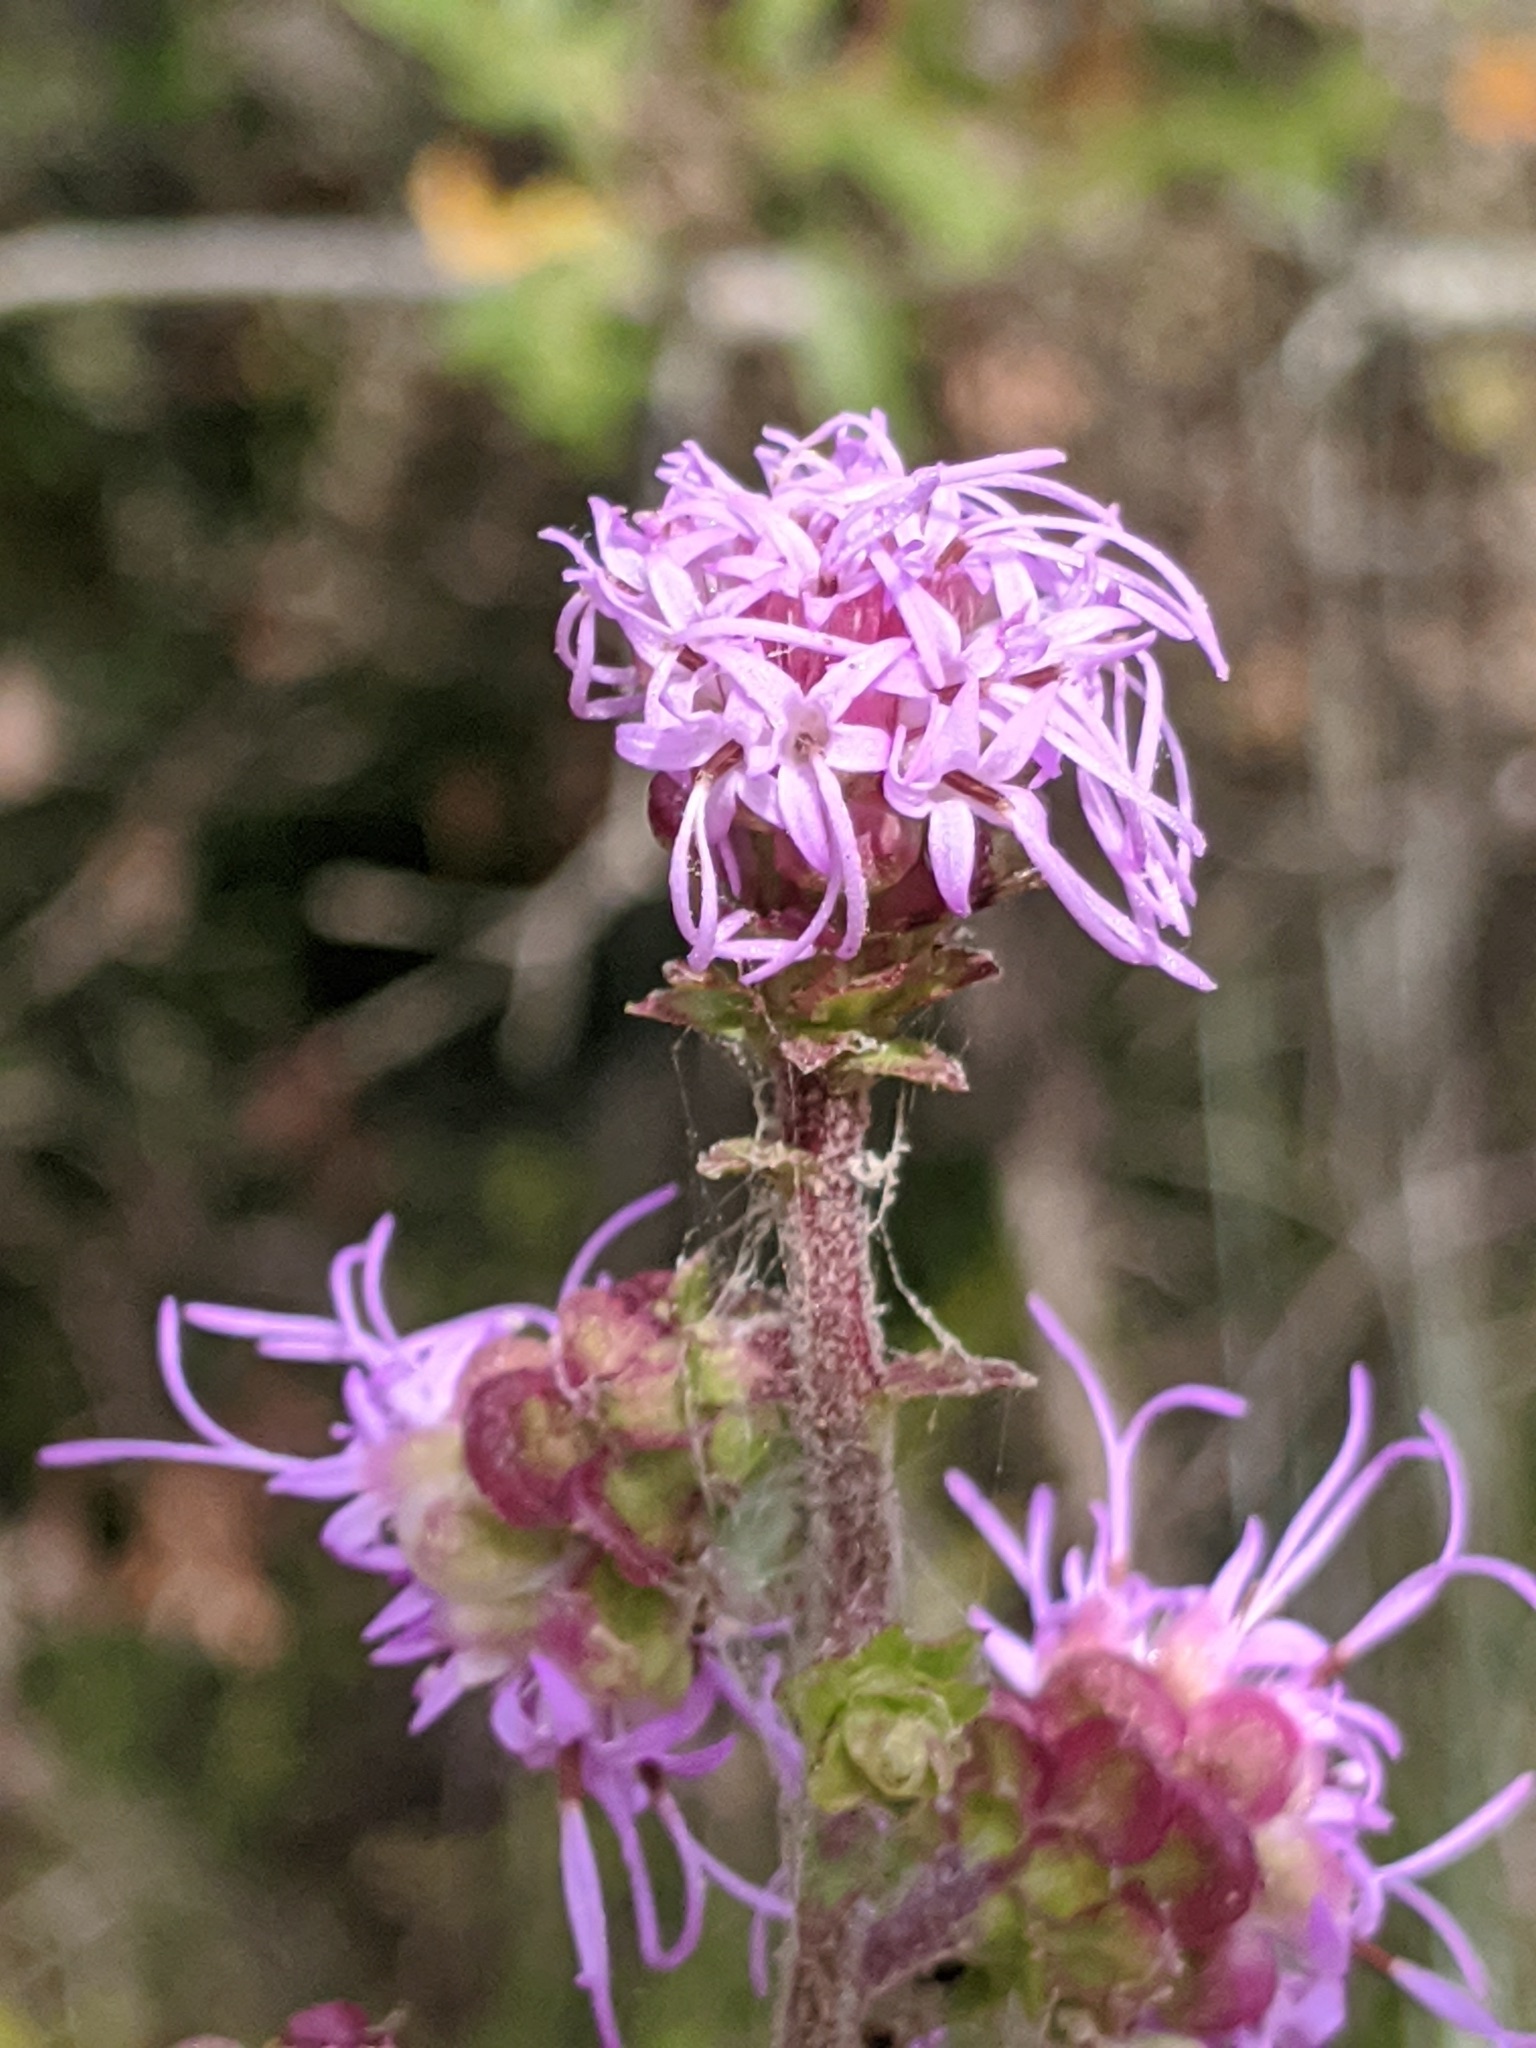 The Scientific Name is Liatris aspera. You will likely hear them called Rough Blazing-star, Tall Blazing-star. This picture shows the Heads have 14-24 pink-purple florets. of Liatris aspera